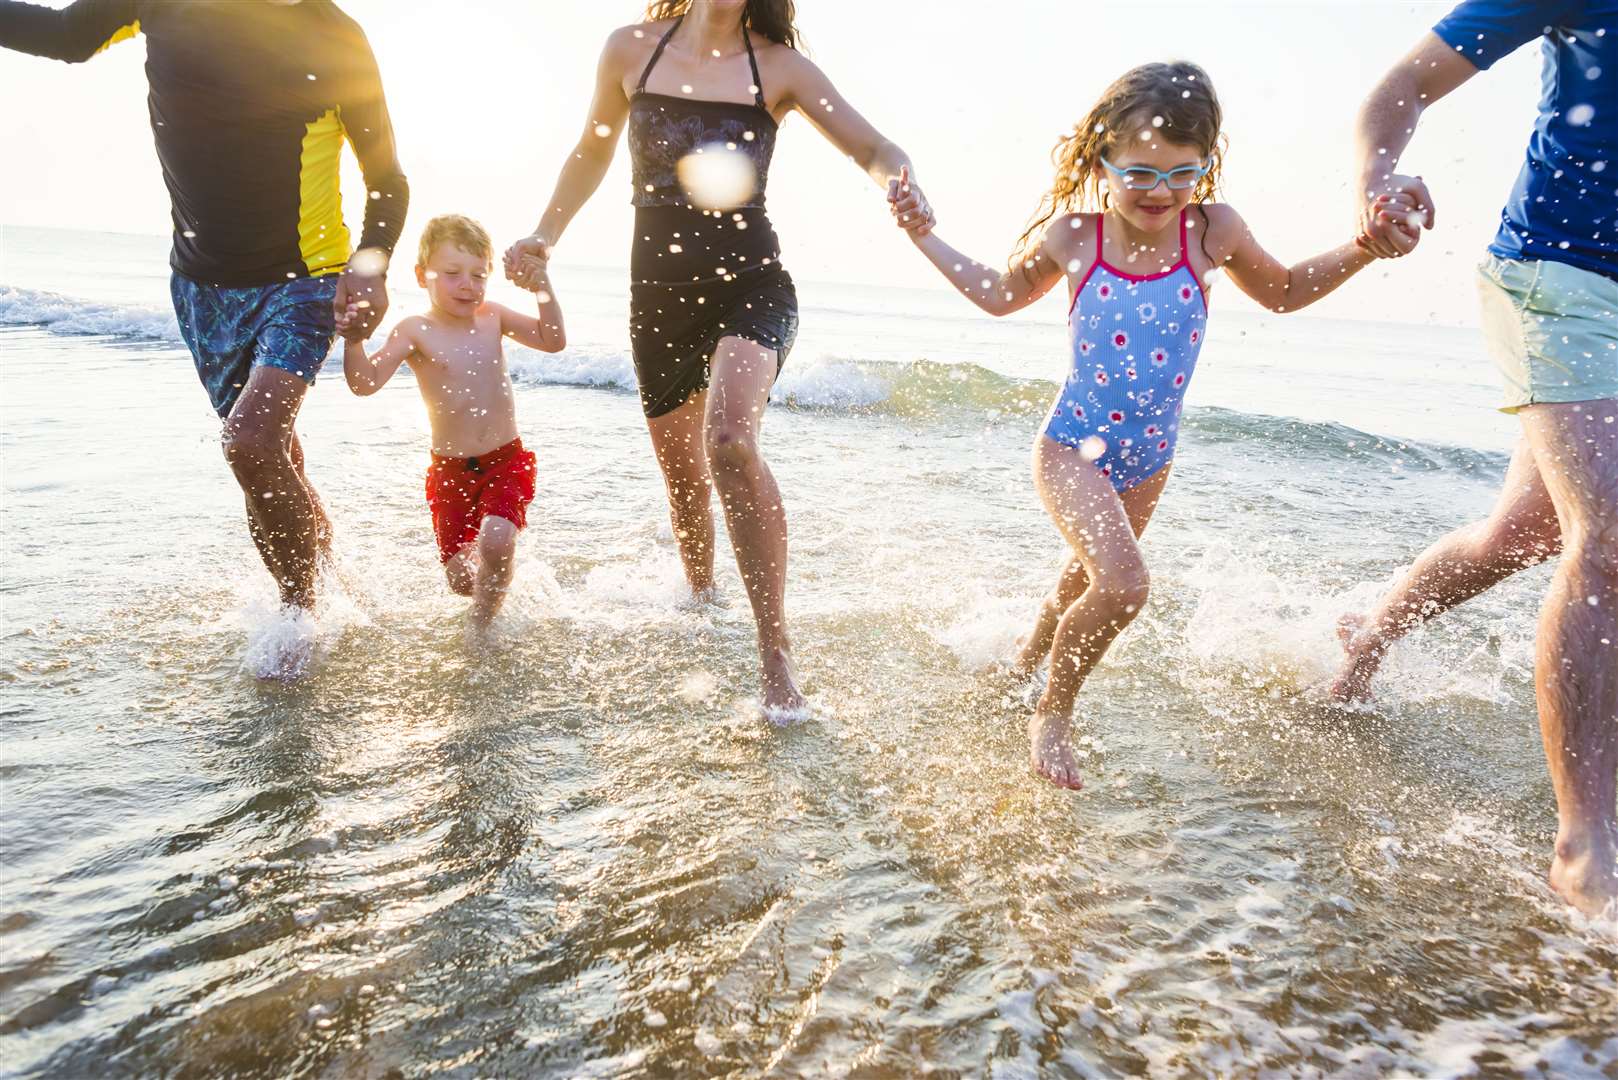 With staycations and beach visits on the rise Swim England has expressed concern about the numbers of children unable to swim